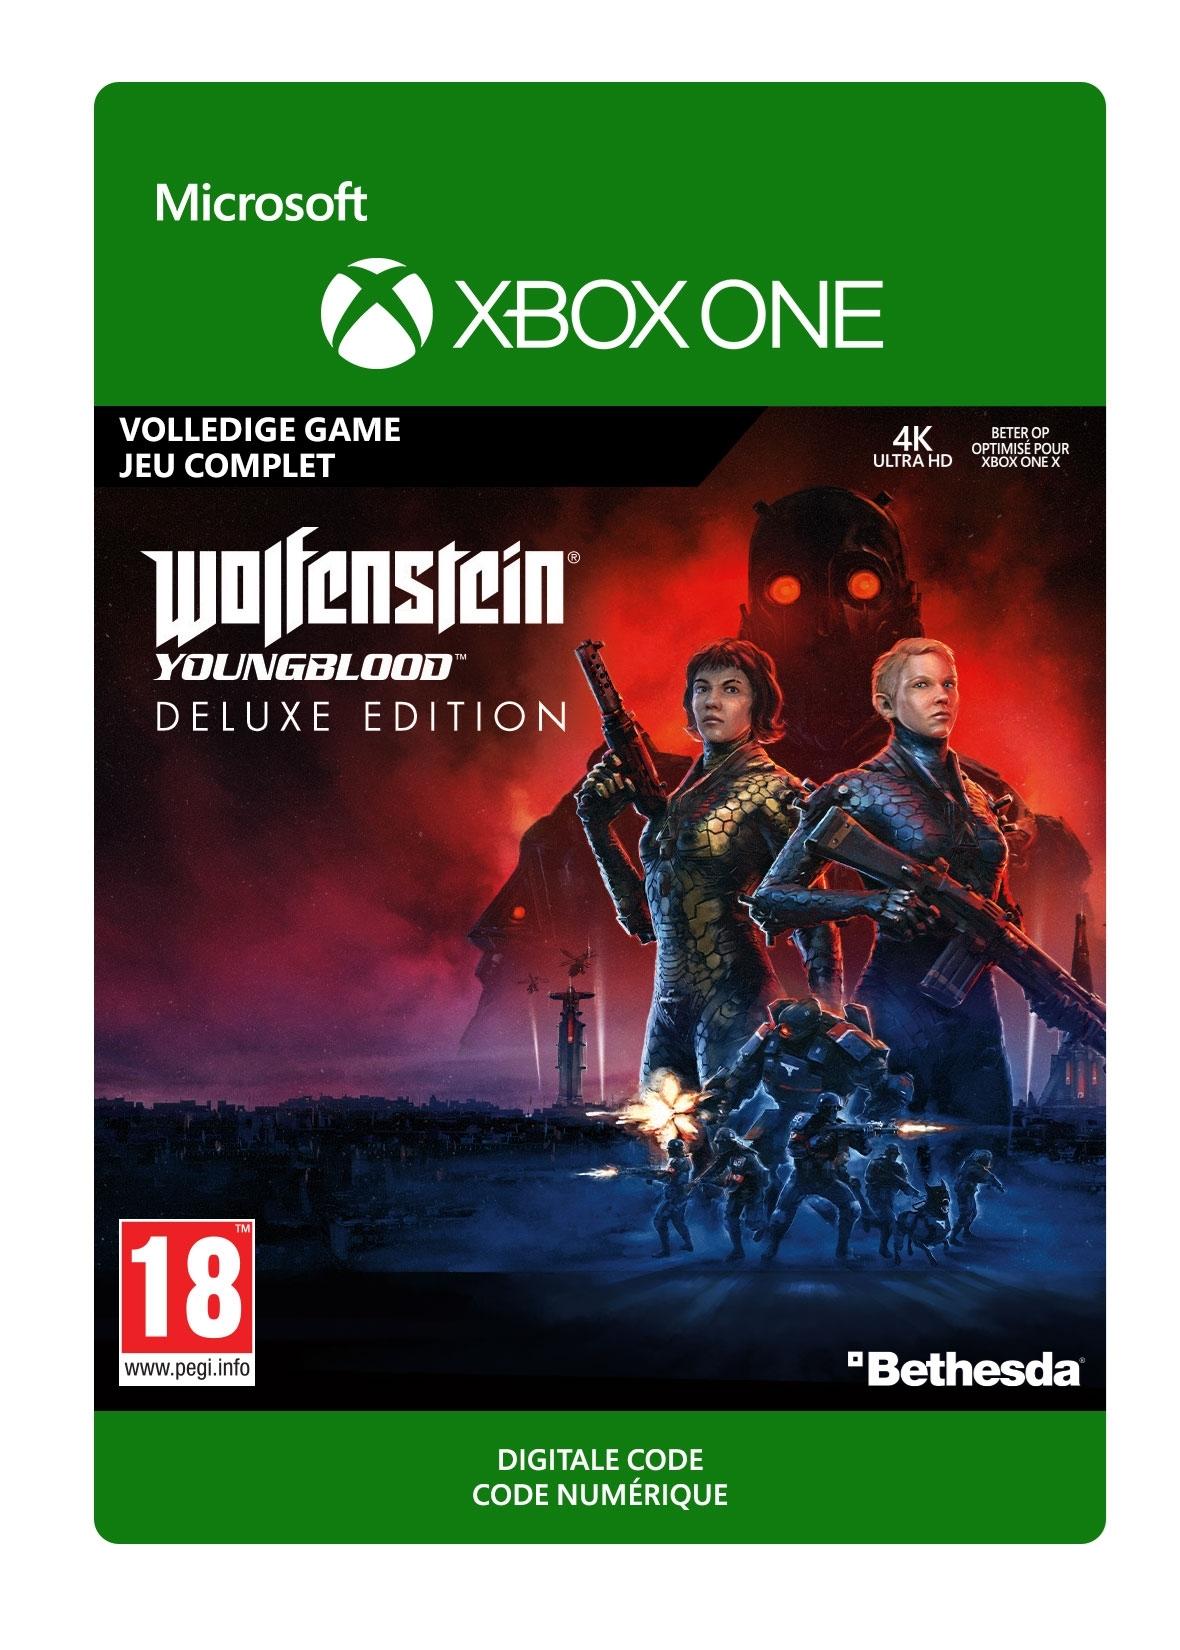 Wolfenstein: Youngblood: Deluxe Edition - Xbox One - Game | G3Q-00703 (8005bf97-4c54-5246-ab00-8349b86e7872)